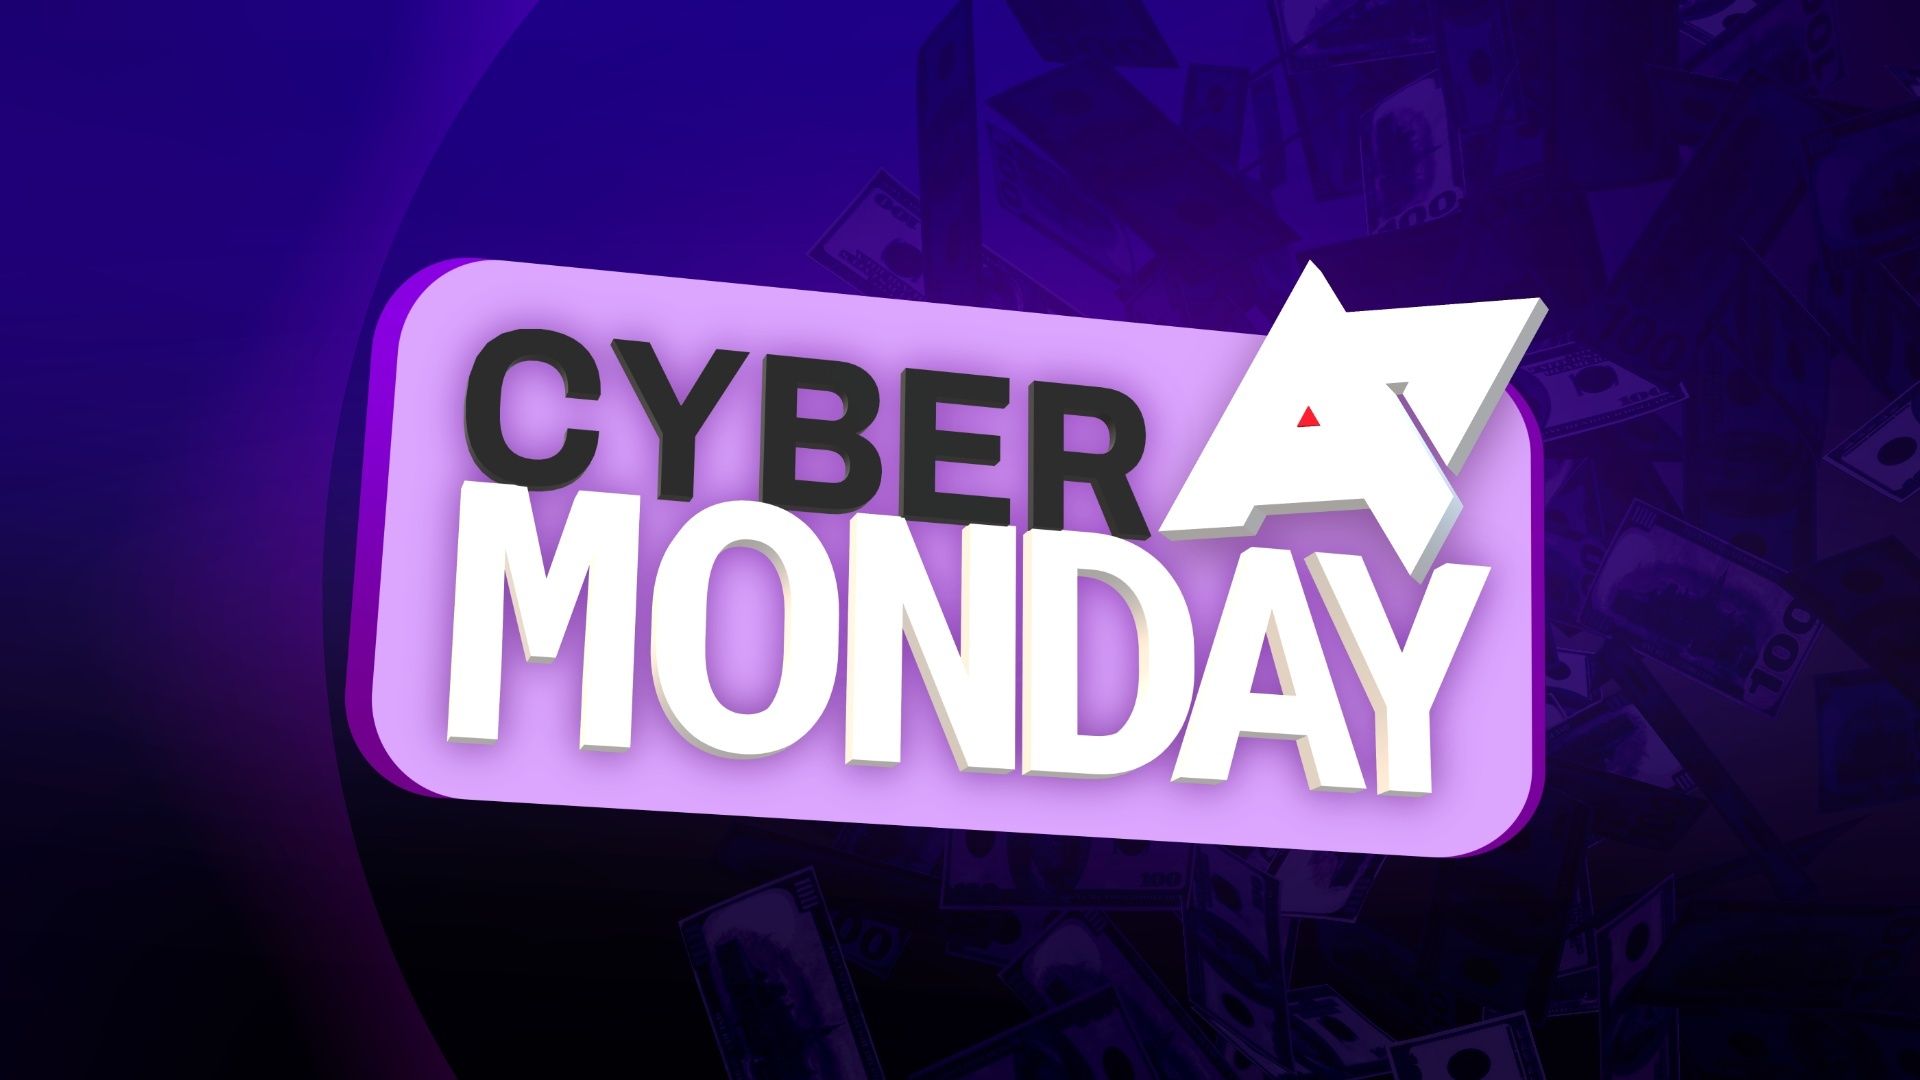 Best Cyber Monday deals 2022: last-minute discounts for Android, Google & Amazon users - Android Police